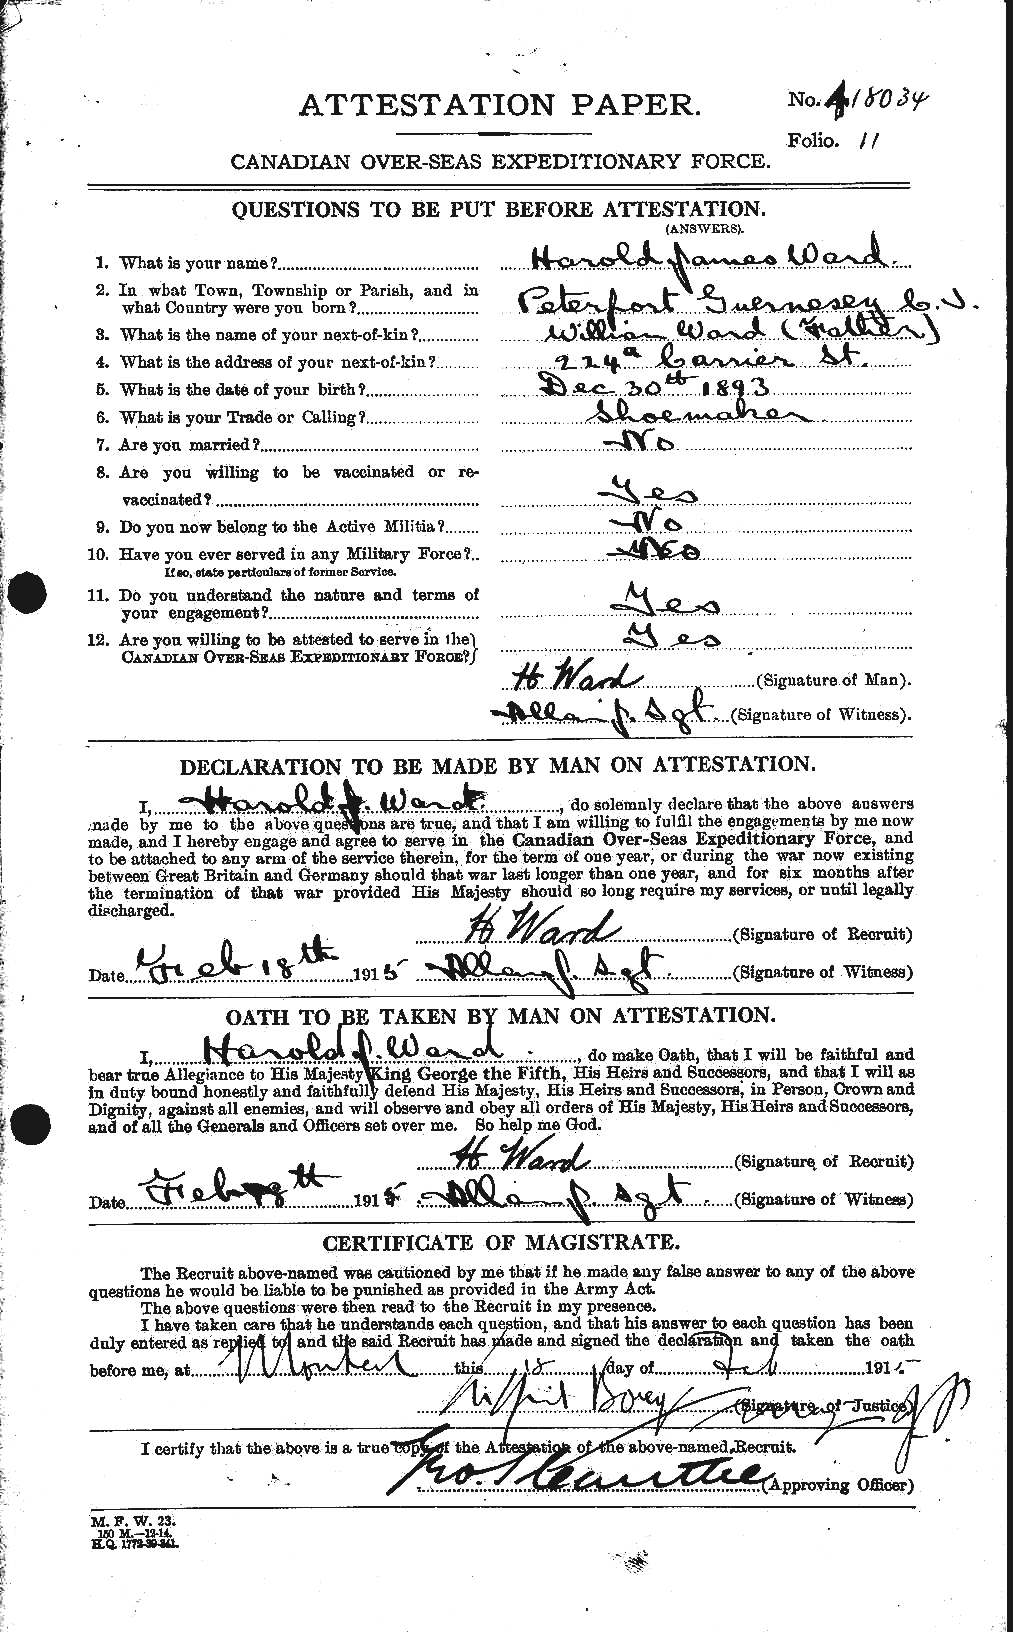 Personnel Records of the First World War - CEF 657802a